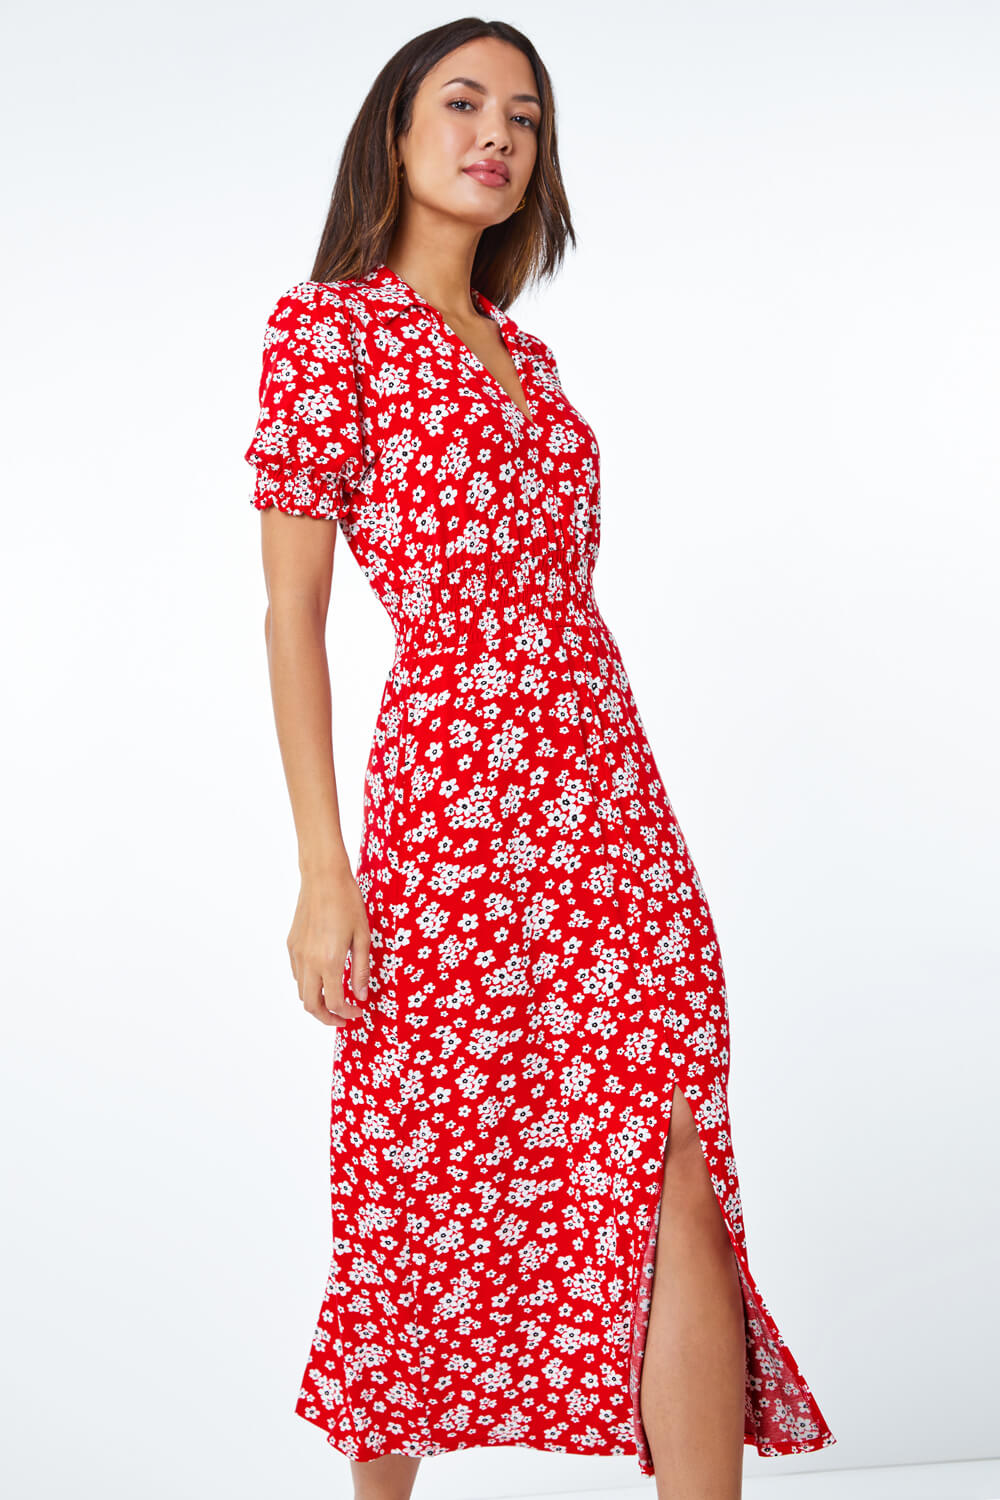 Ditsy Floral Print Fit & Flare Dress in Red - Roman Originals UK